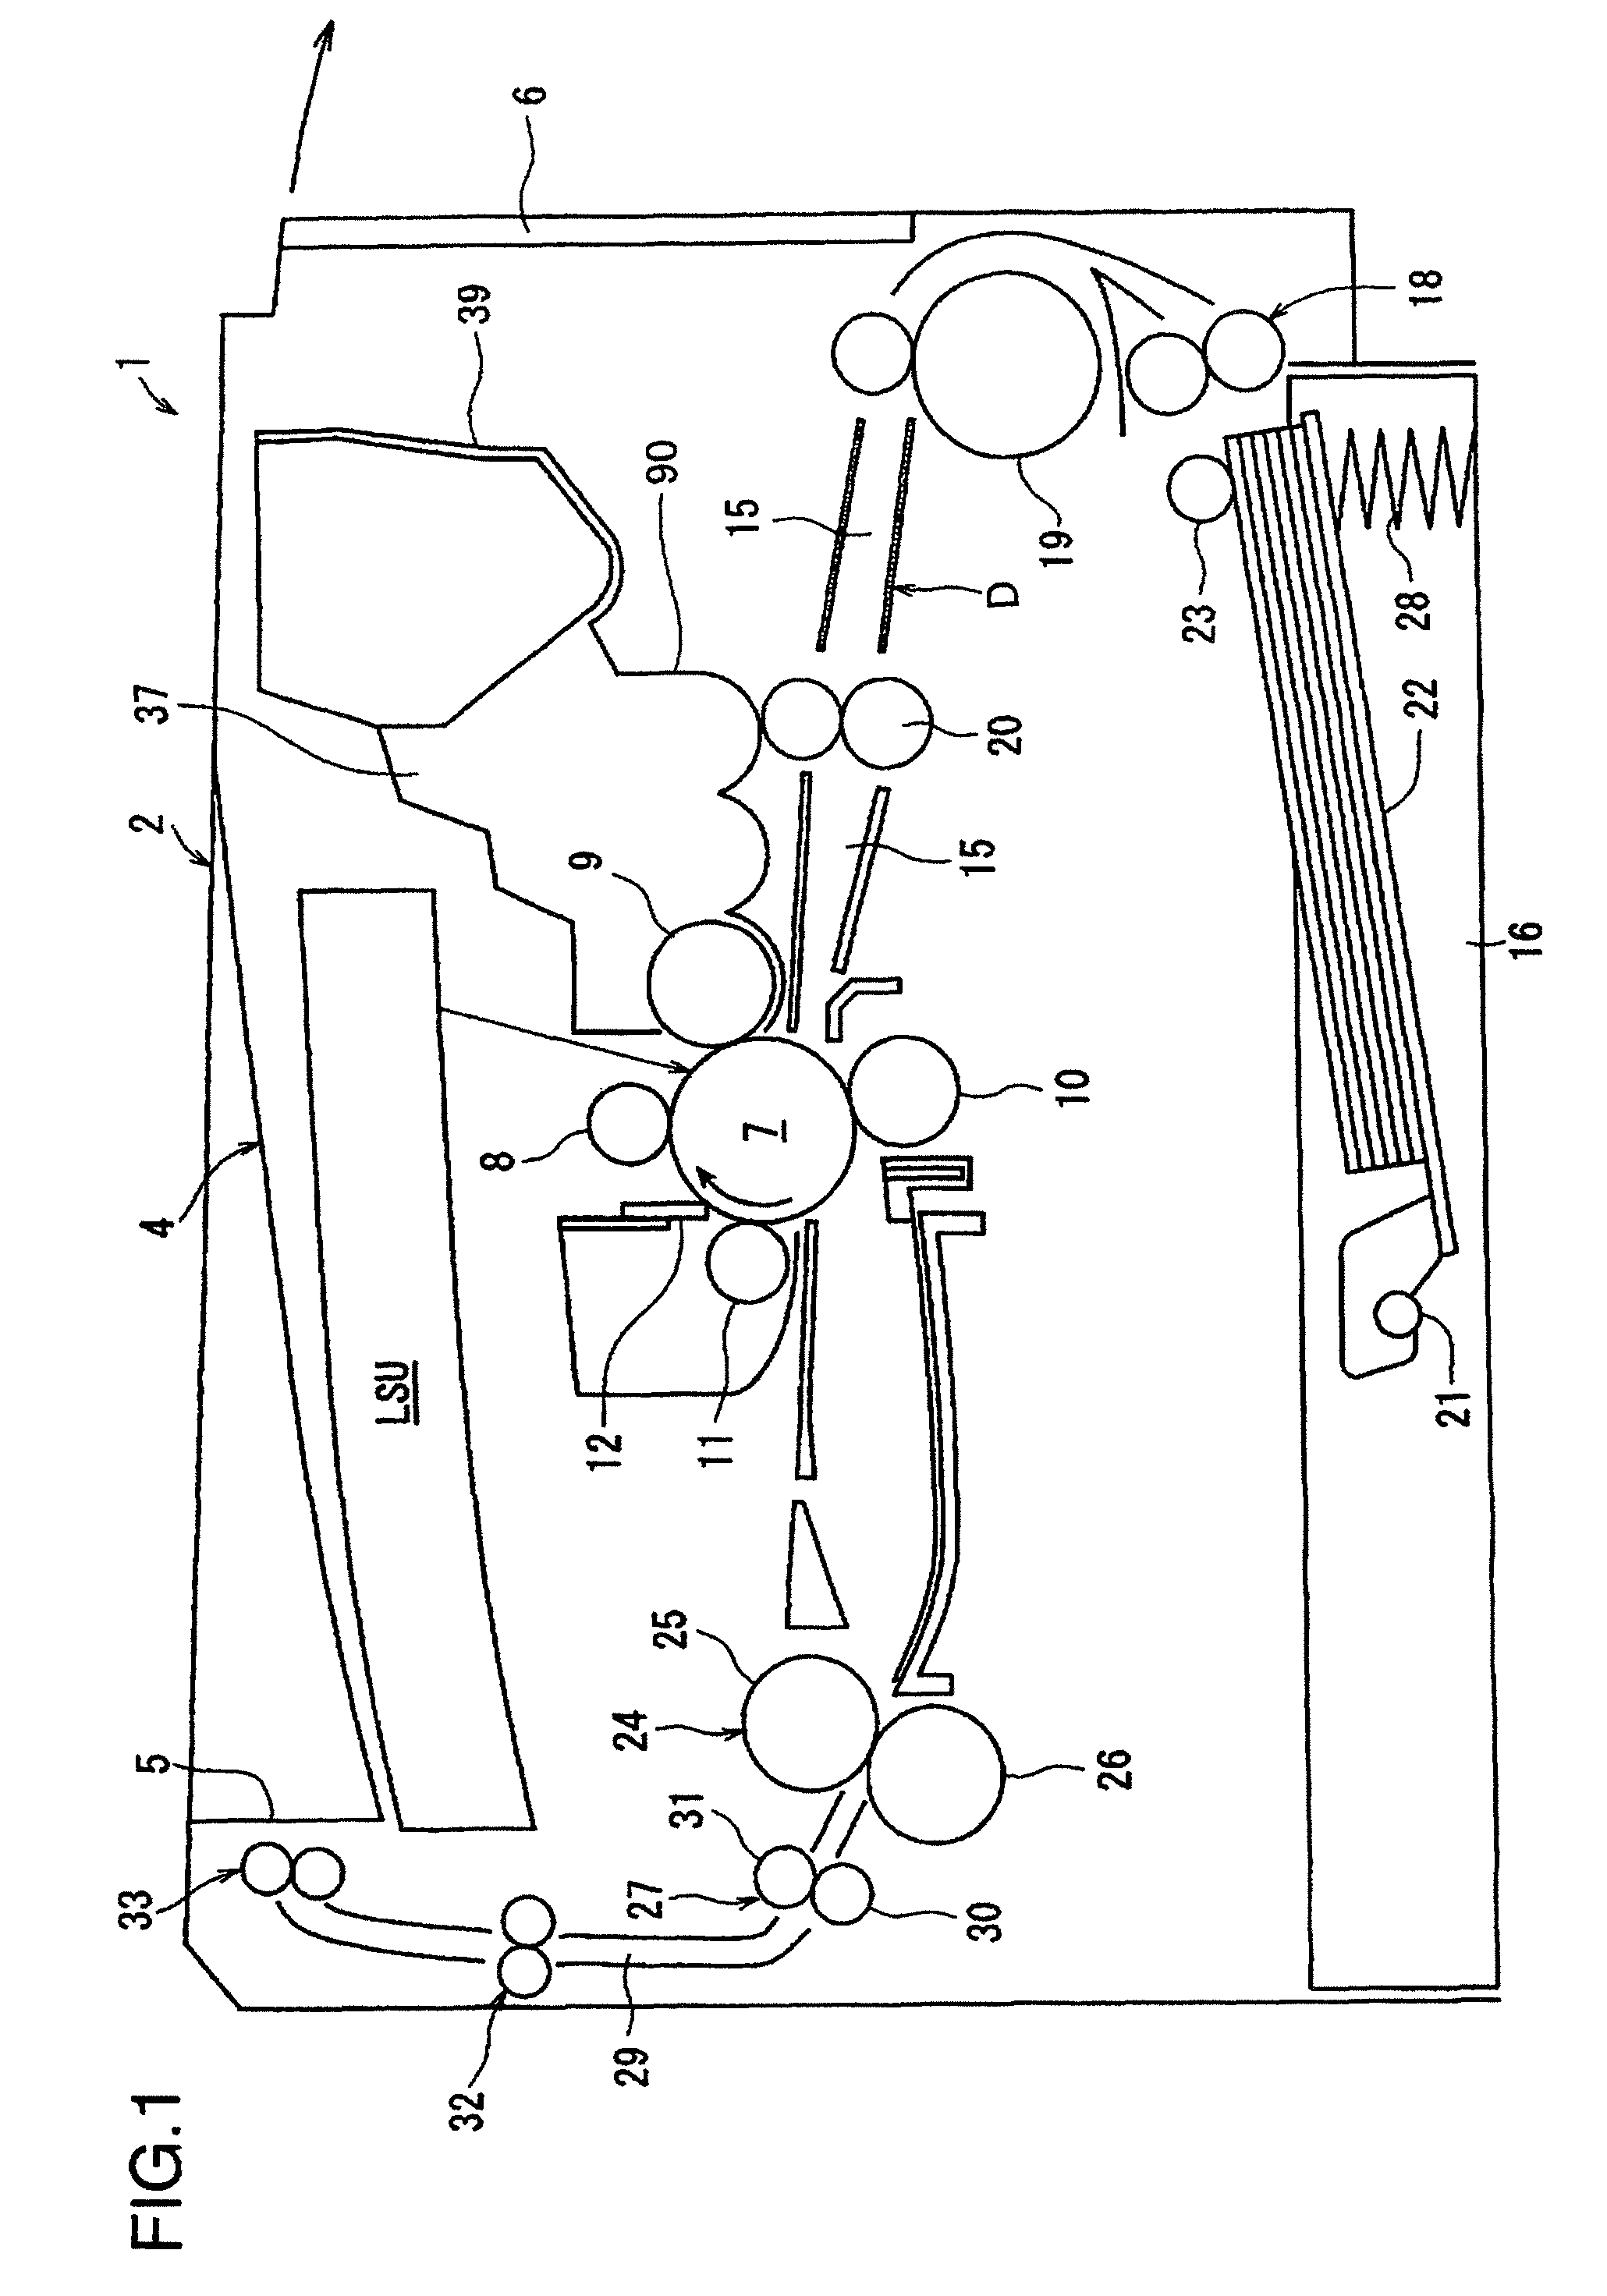 Image forming apparatus provided with transfer roller